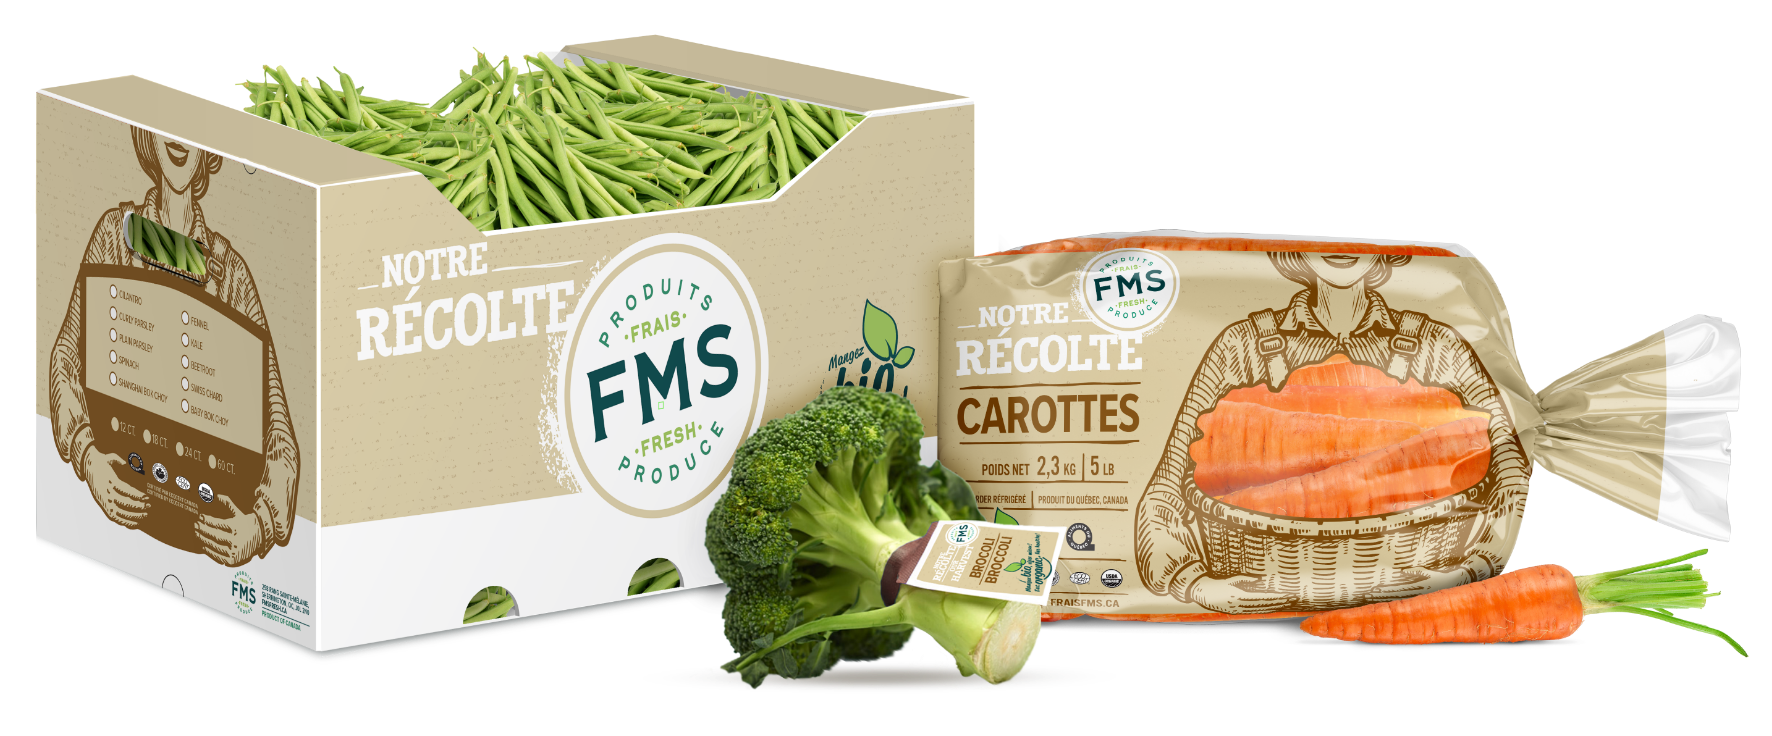 FMS Product Packaging